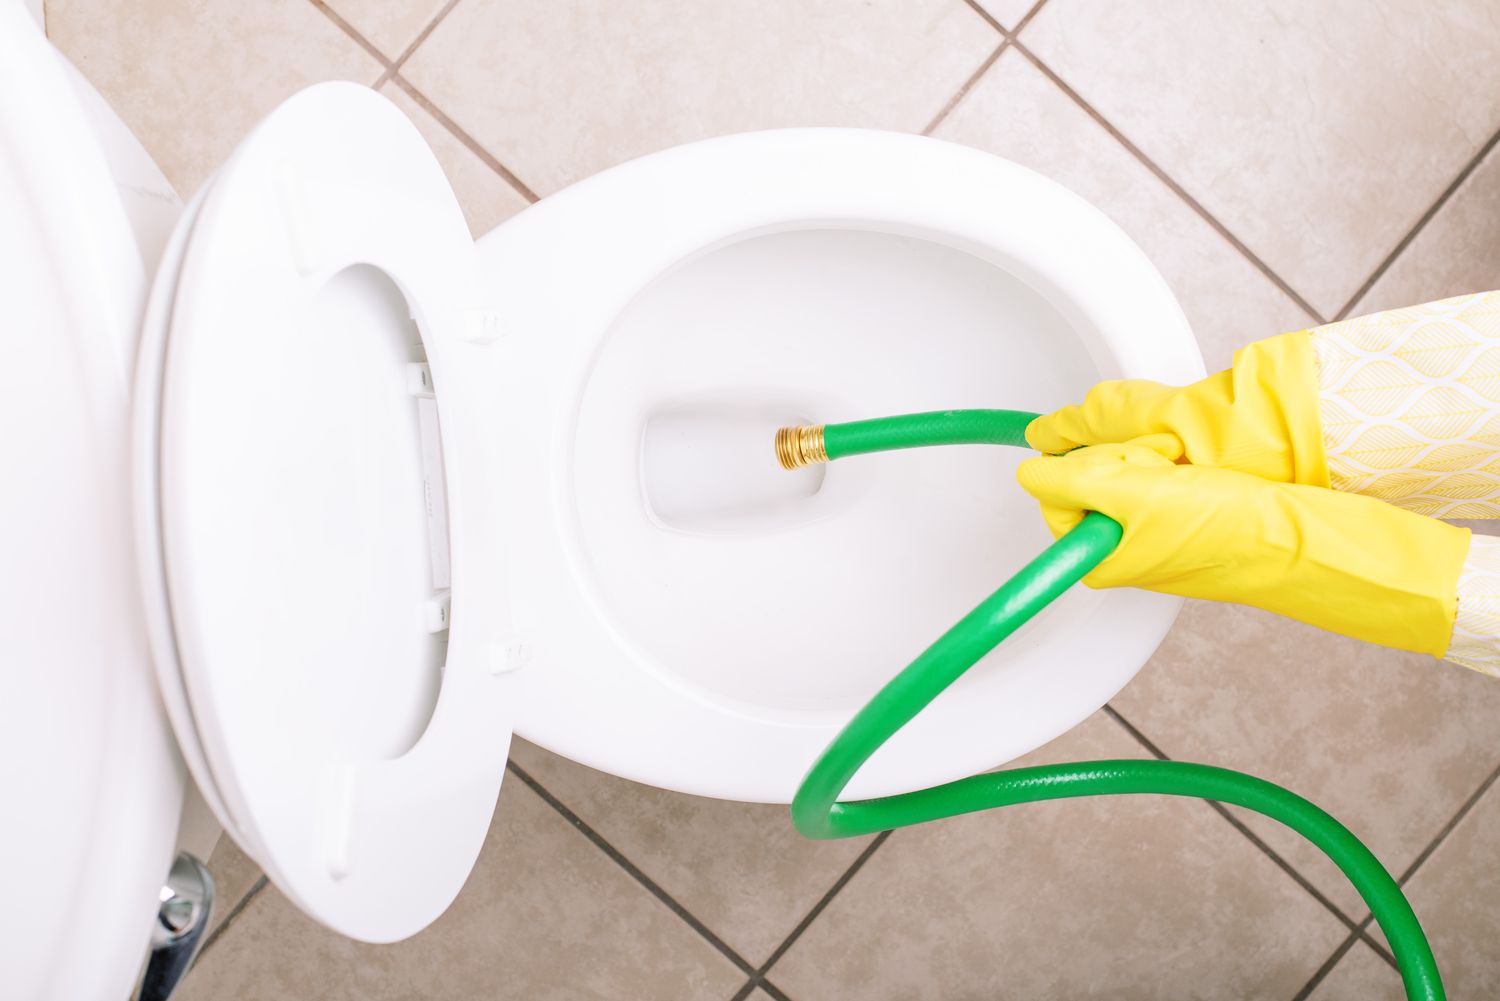 How To Remove Water From A Toilet Bowl